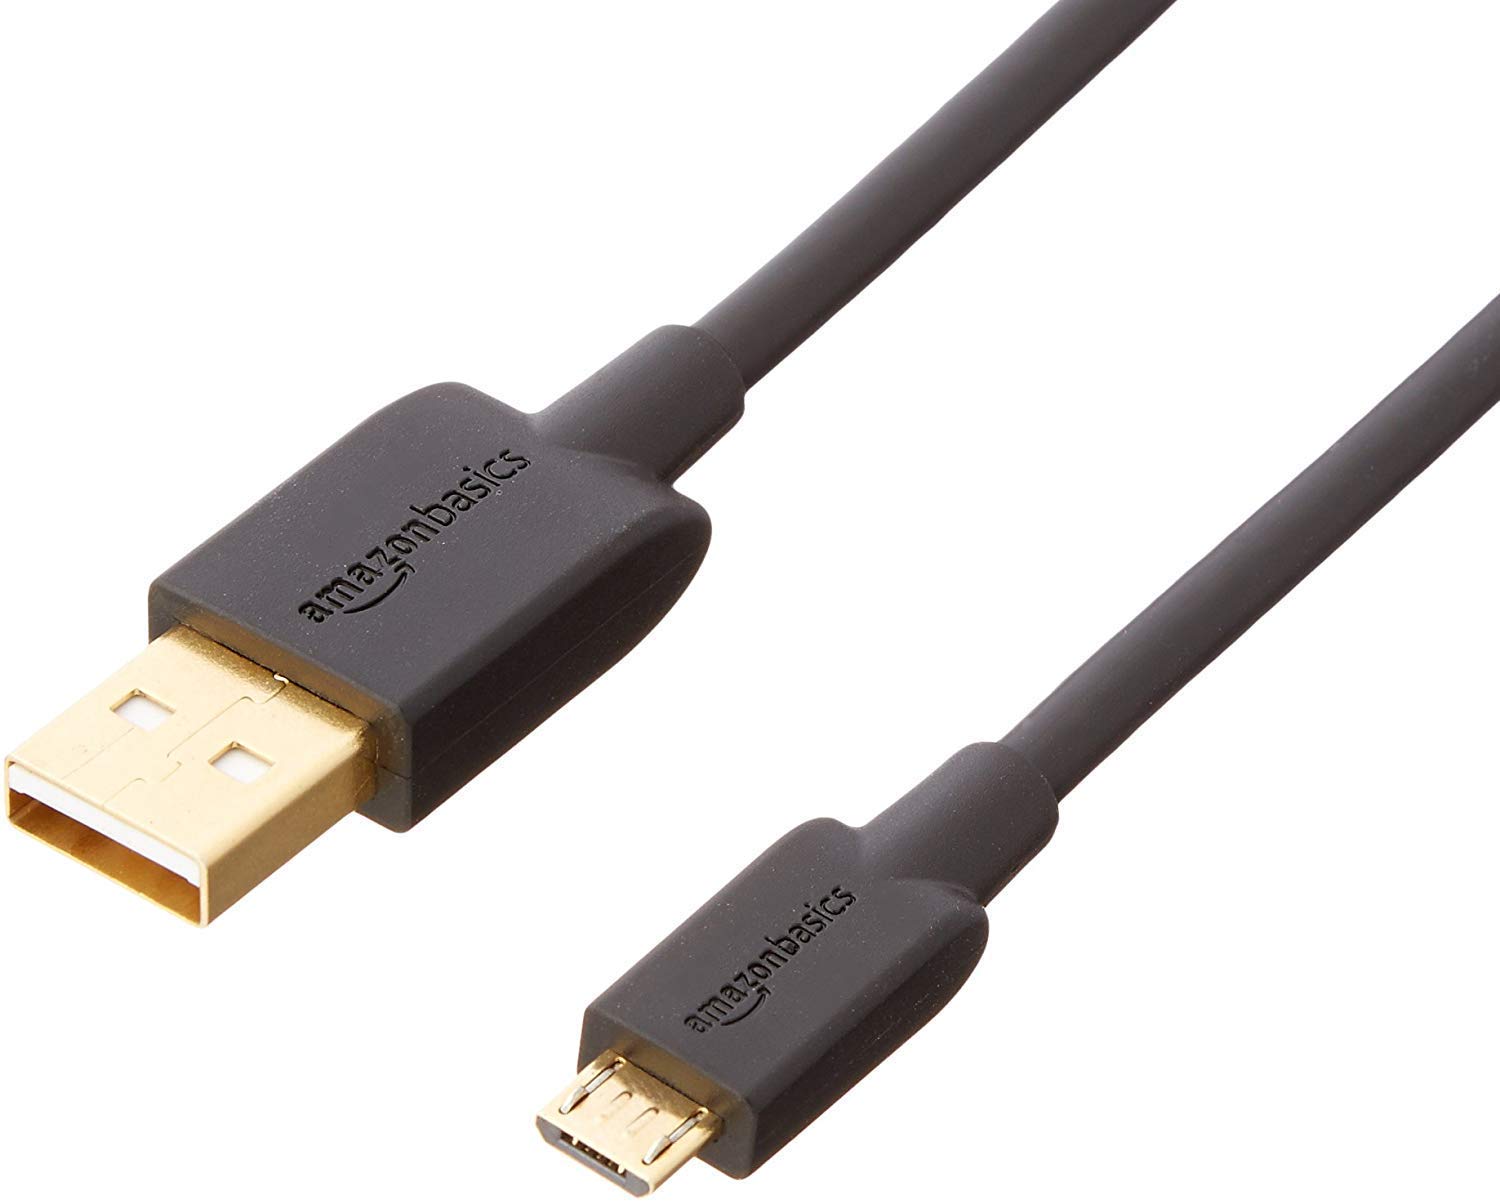 Amazon Basics USB-A to Micro USB Fast Charging Cable, [...]